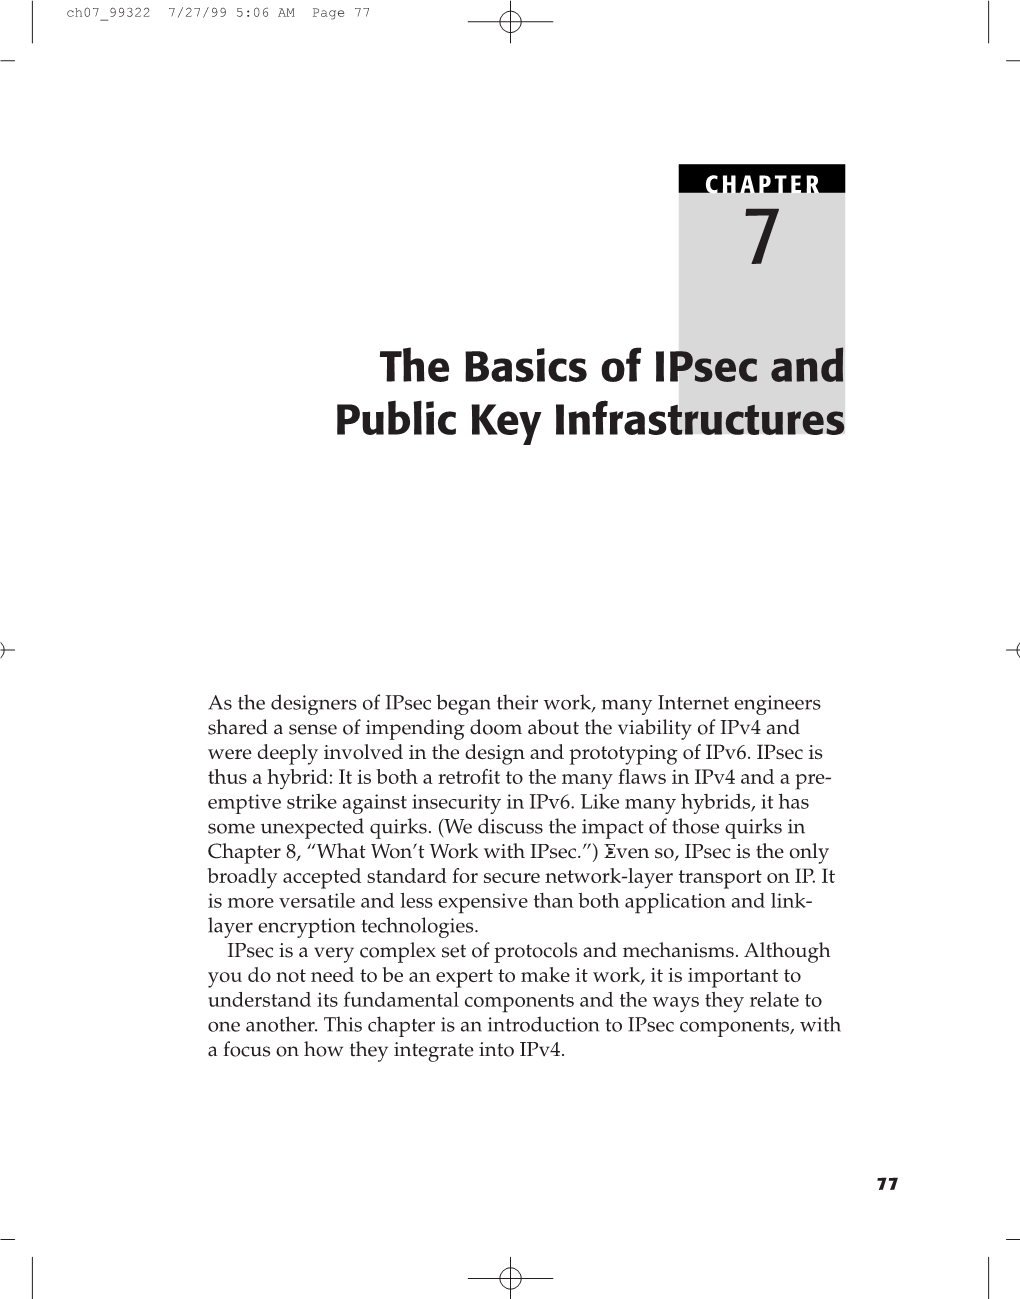 The Basics of Ipsec and Public Key Infrastructures